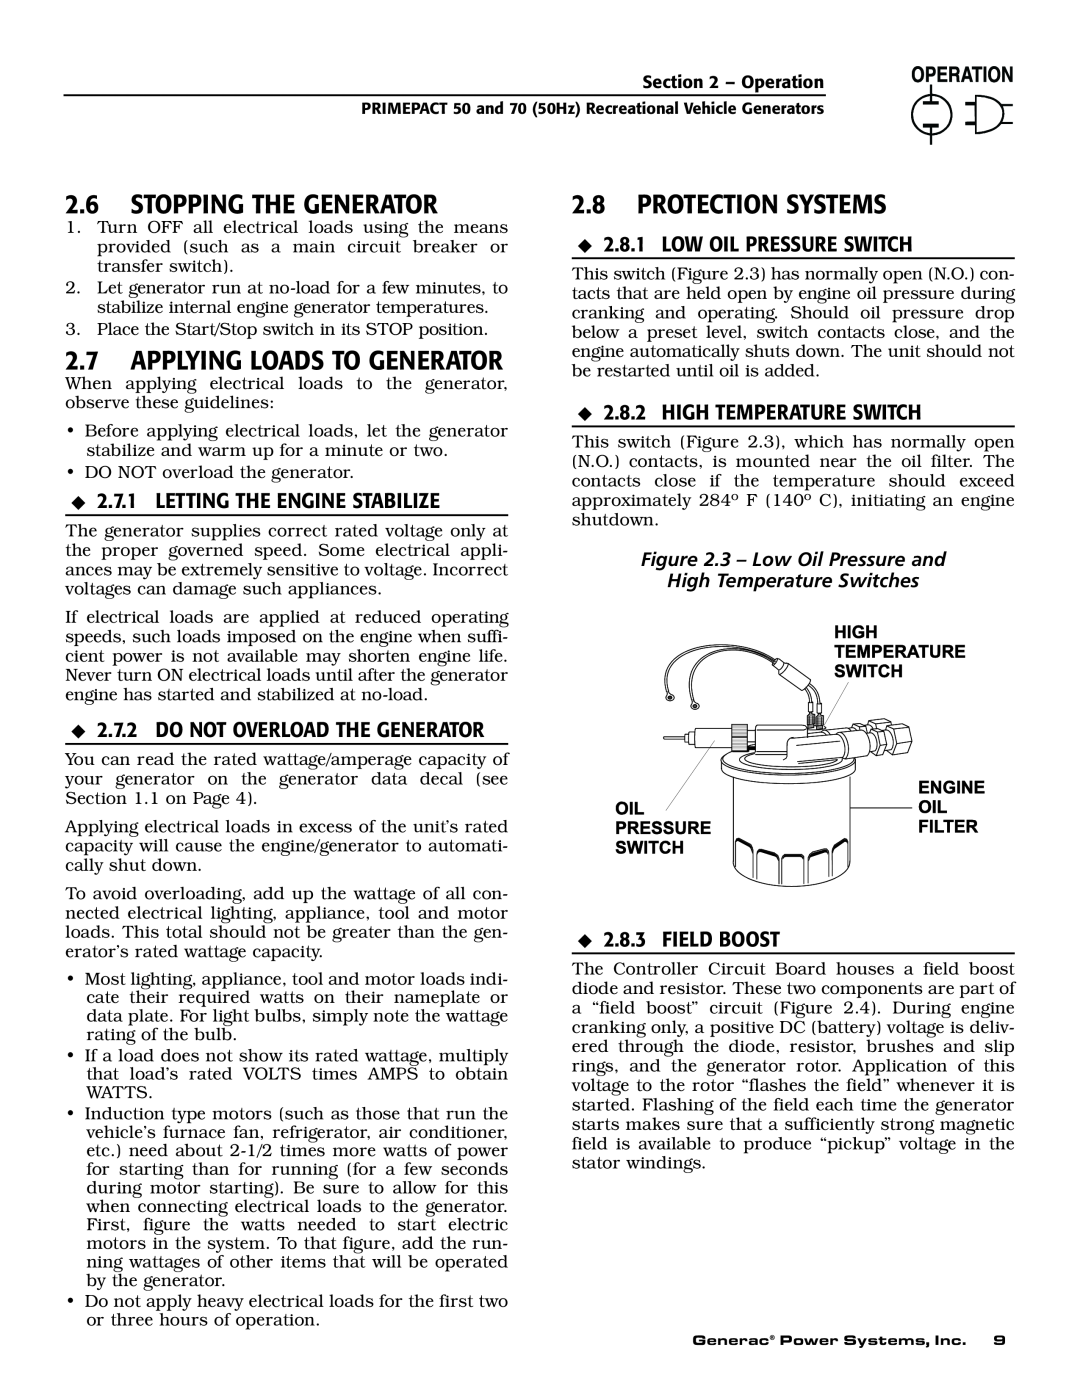 Generac 00784-2, 09290-4 Stopping The Generator, Protection Systems, Applying Loads To Generator, Low Oil Pressure Switch 